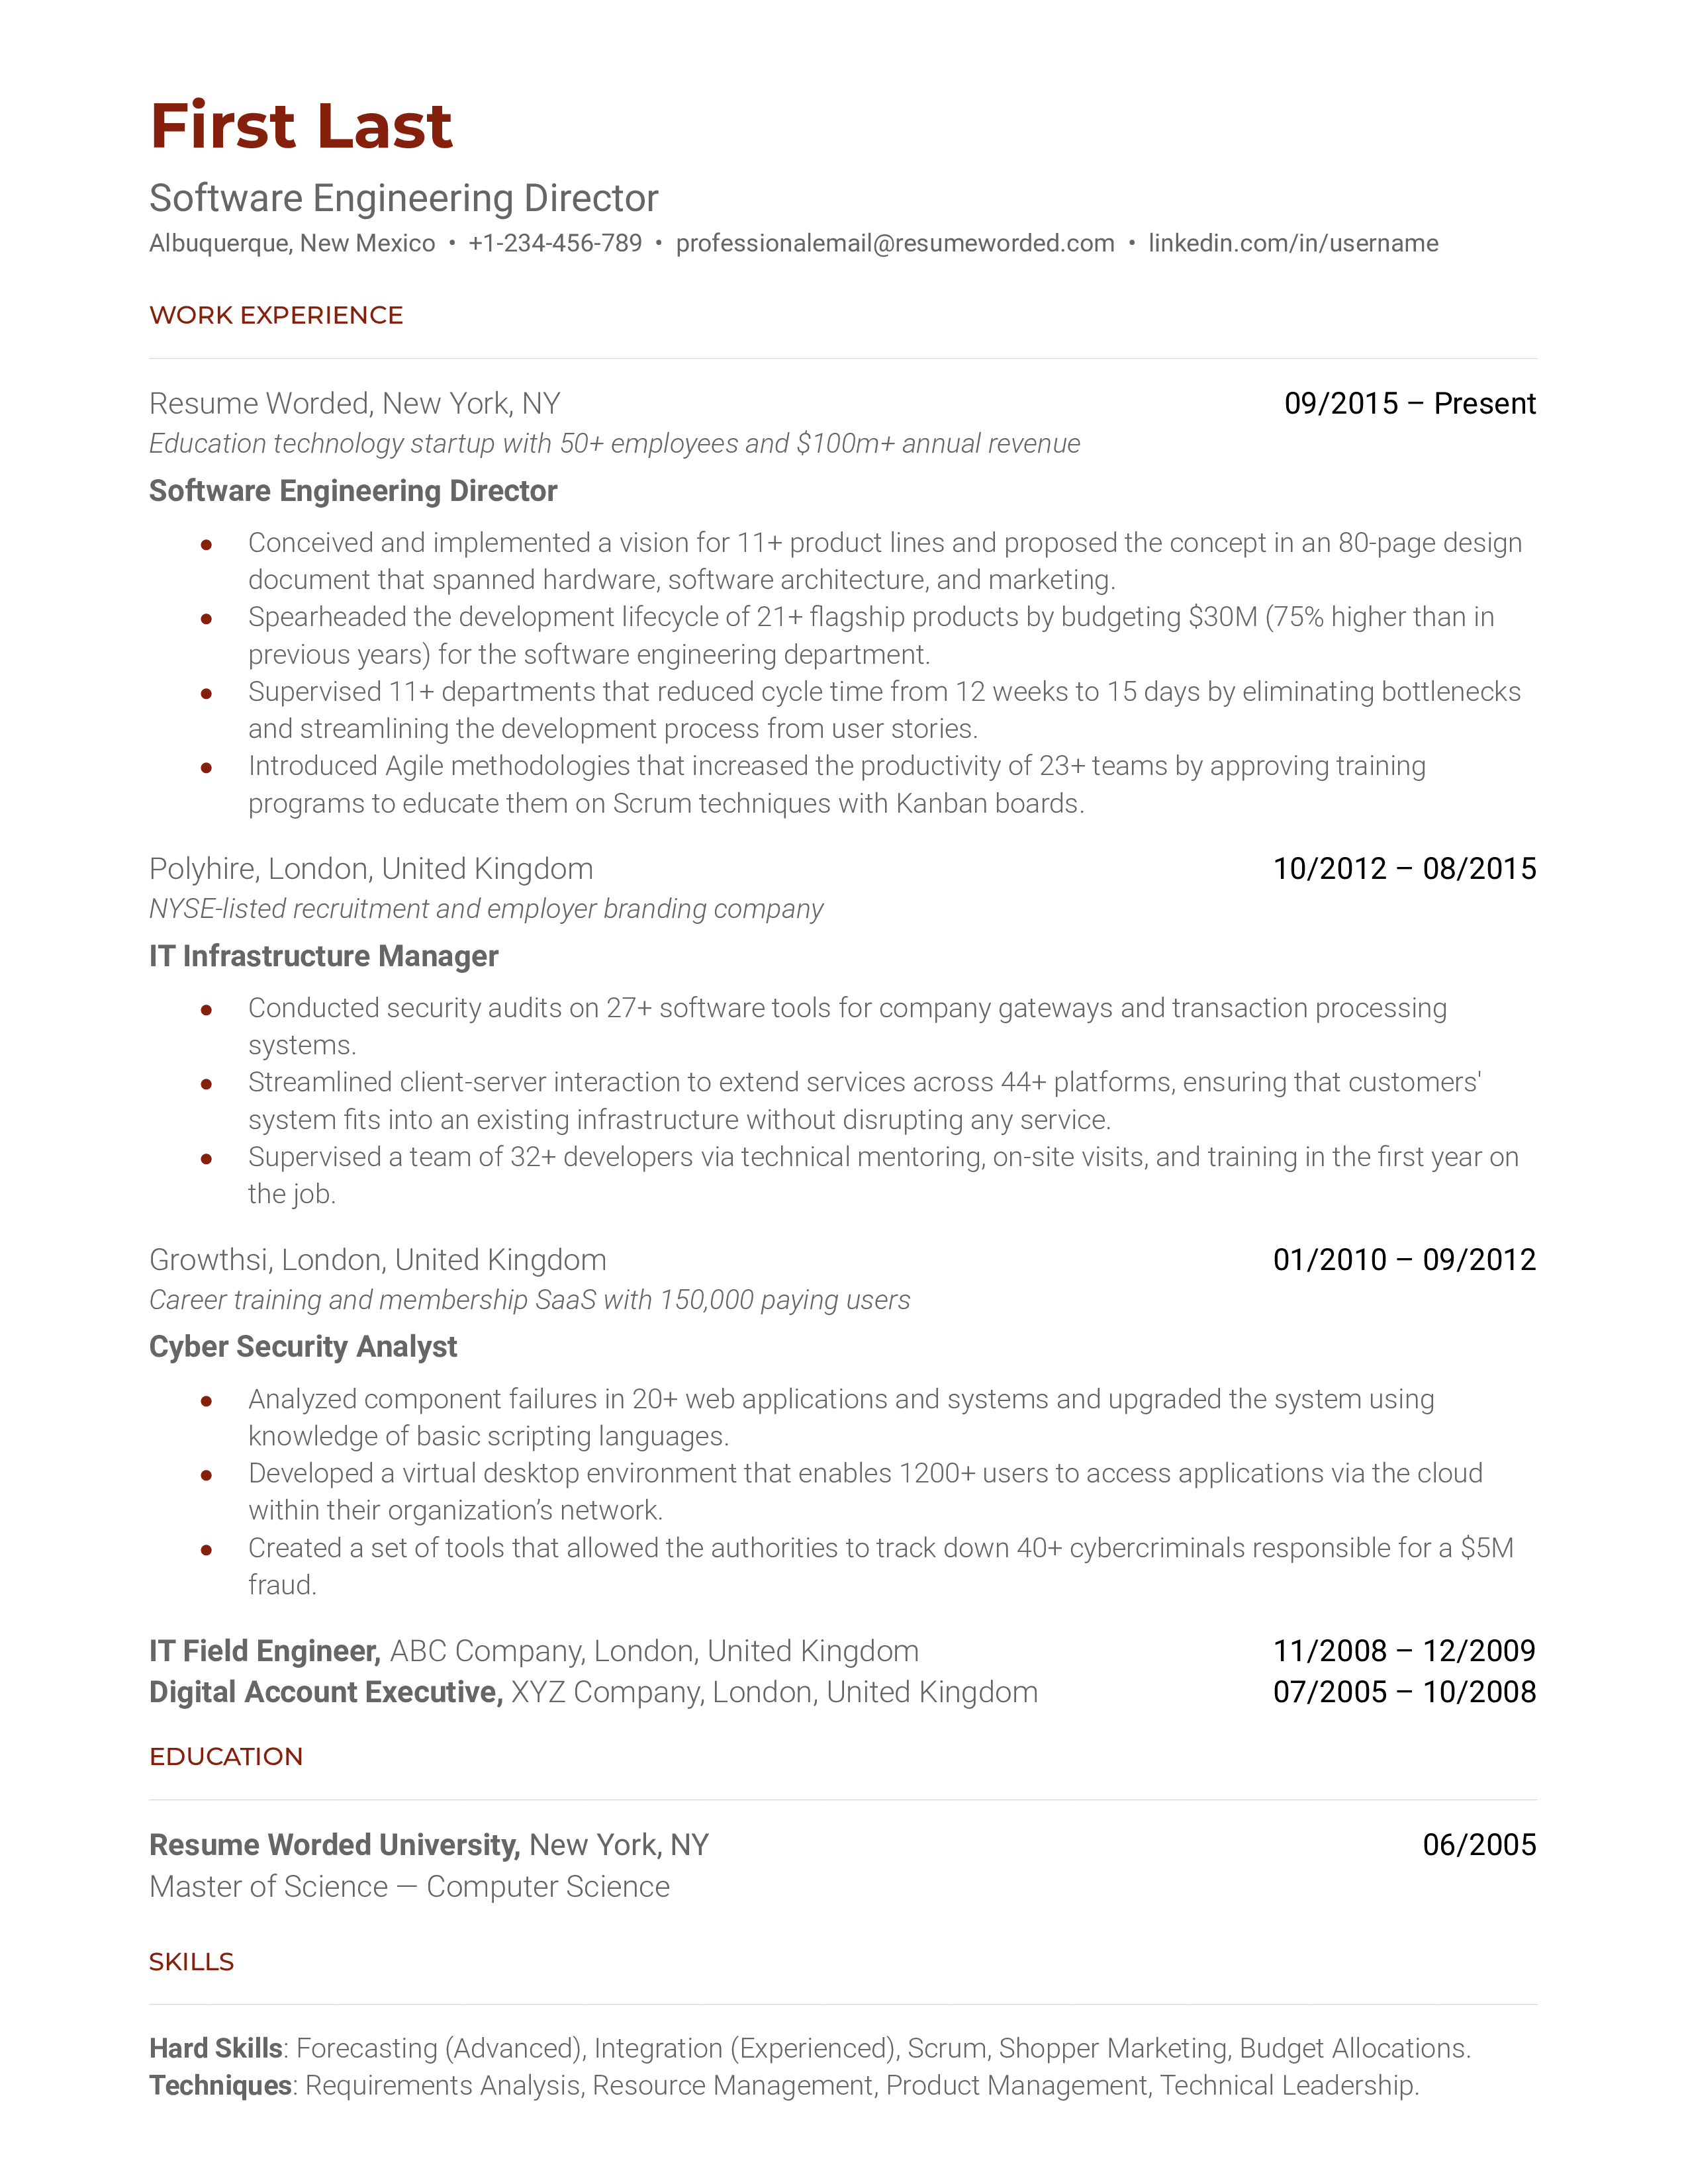 A software engineering director resume template including relevant work experience and skills. 